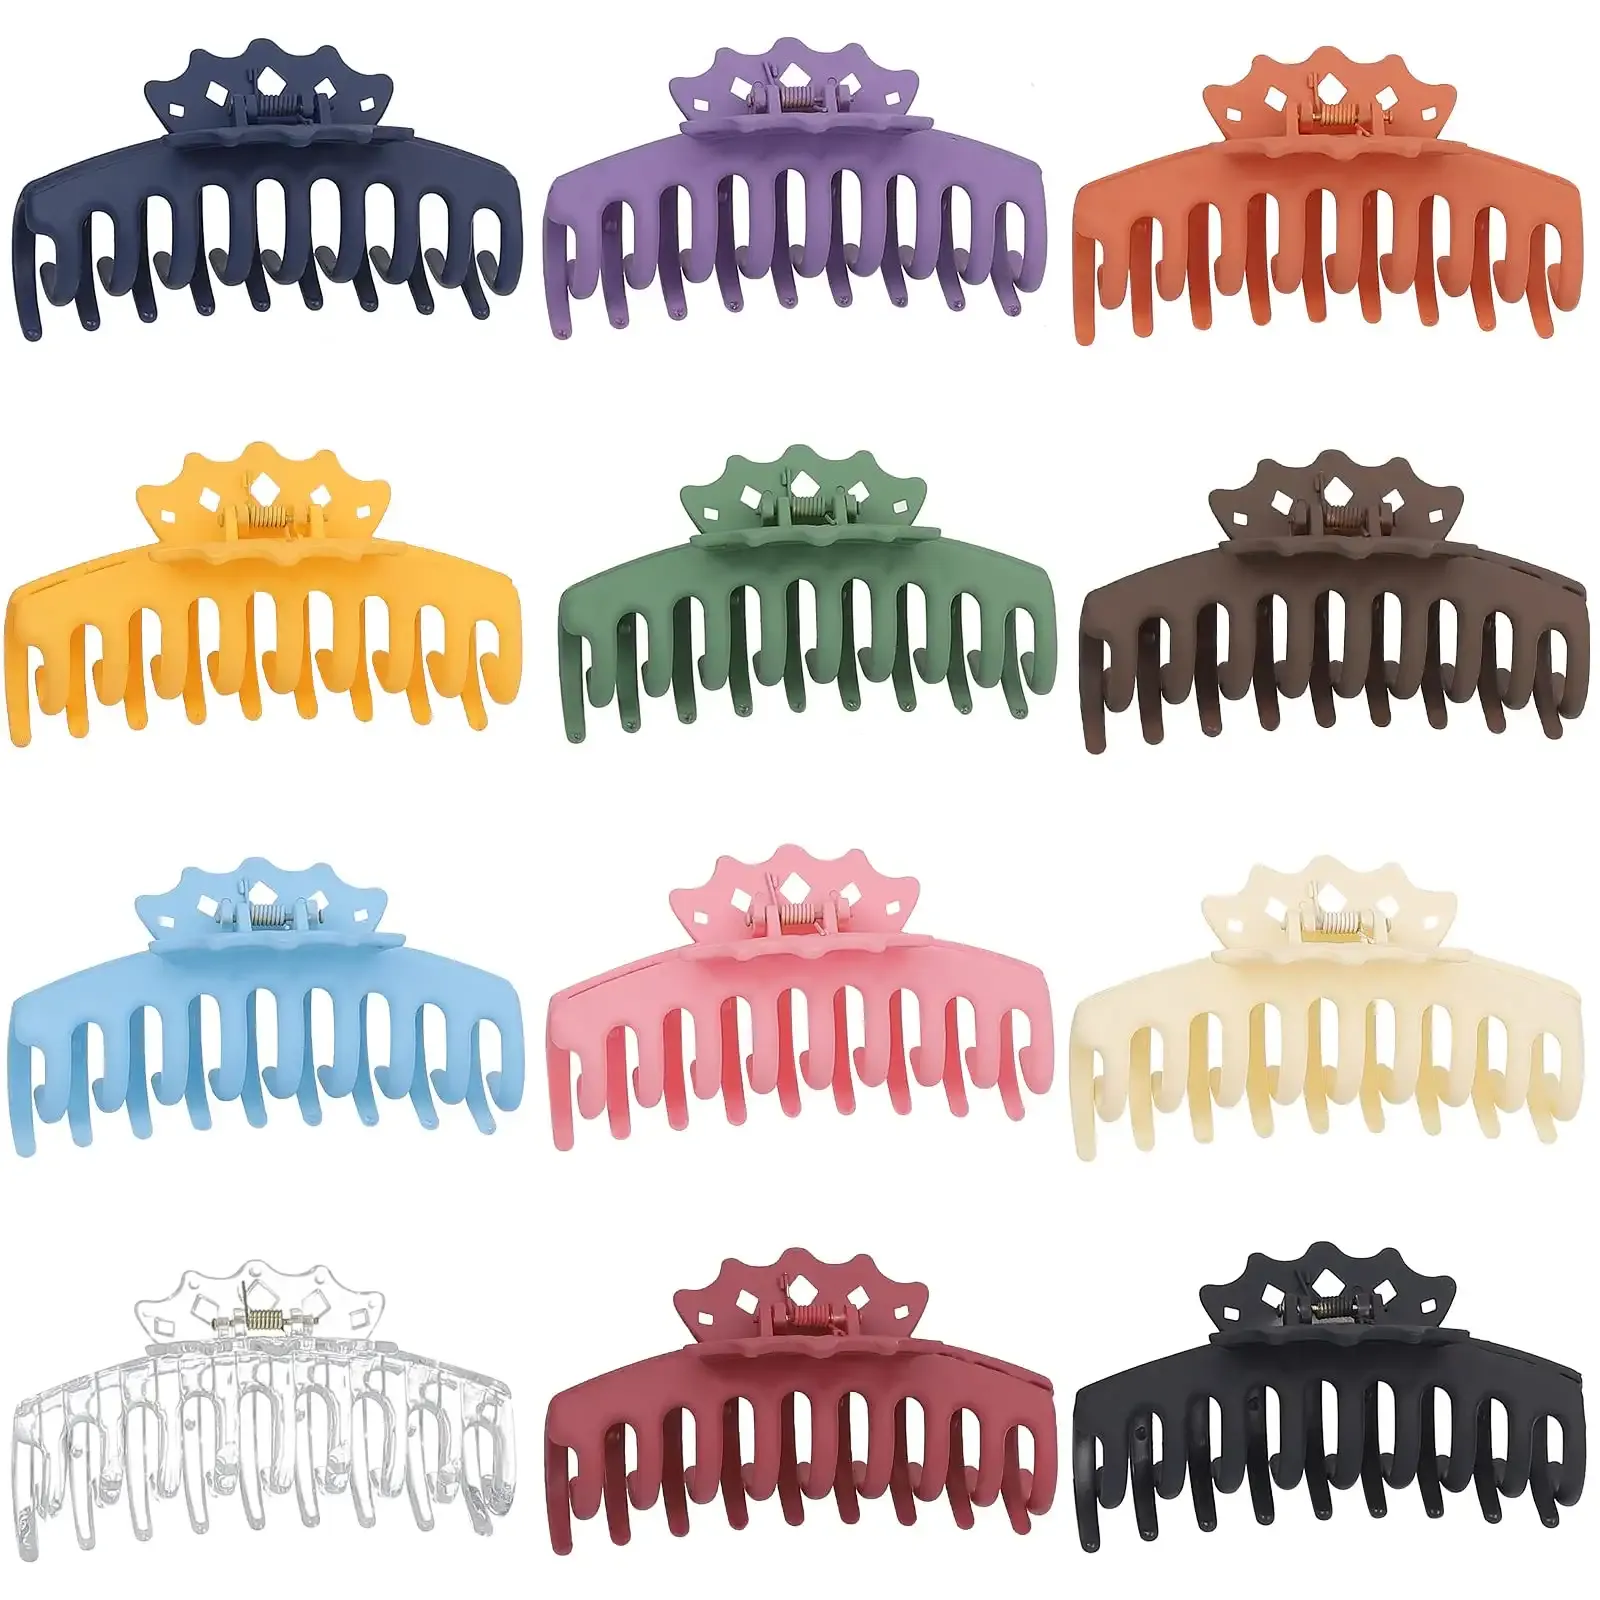 Hårklämmor Barrettes Crown Design Stor Claw for Women Matt Big Thick Banana Thin 4 2 Strong Nonslip Long Curly Styling Accessories Amxja